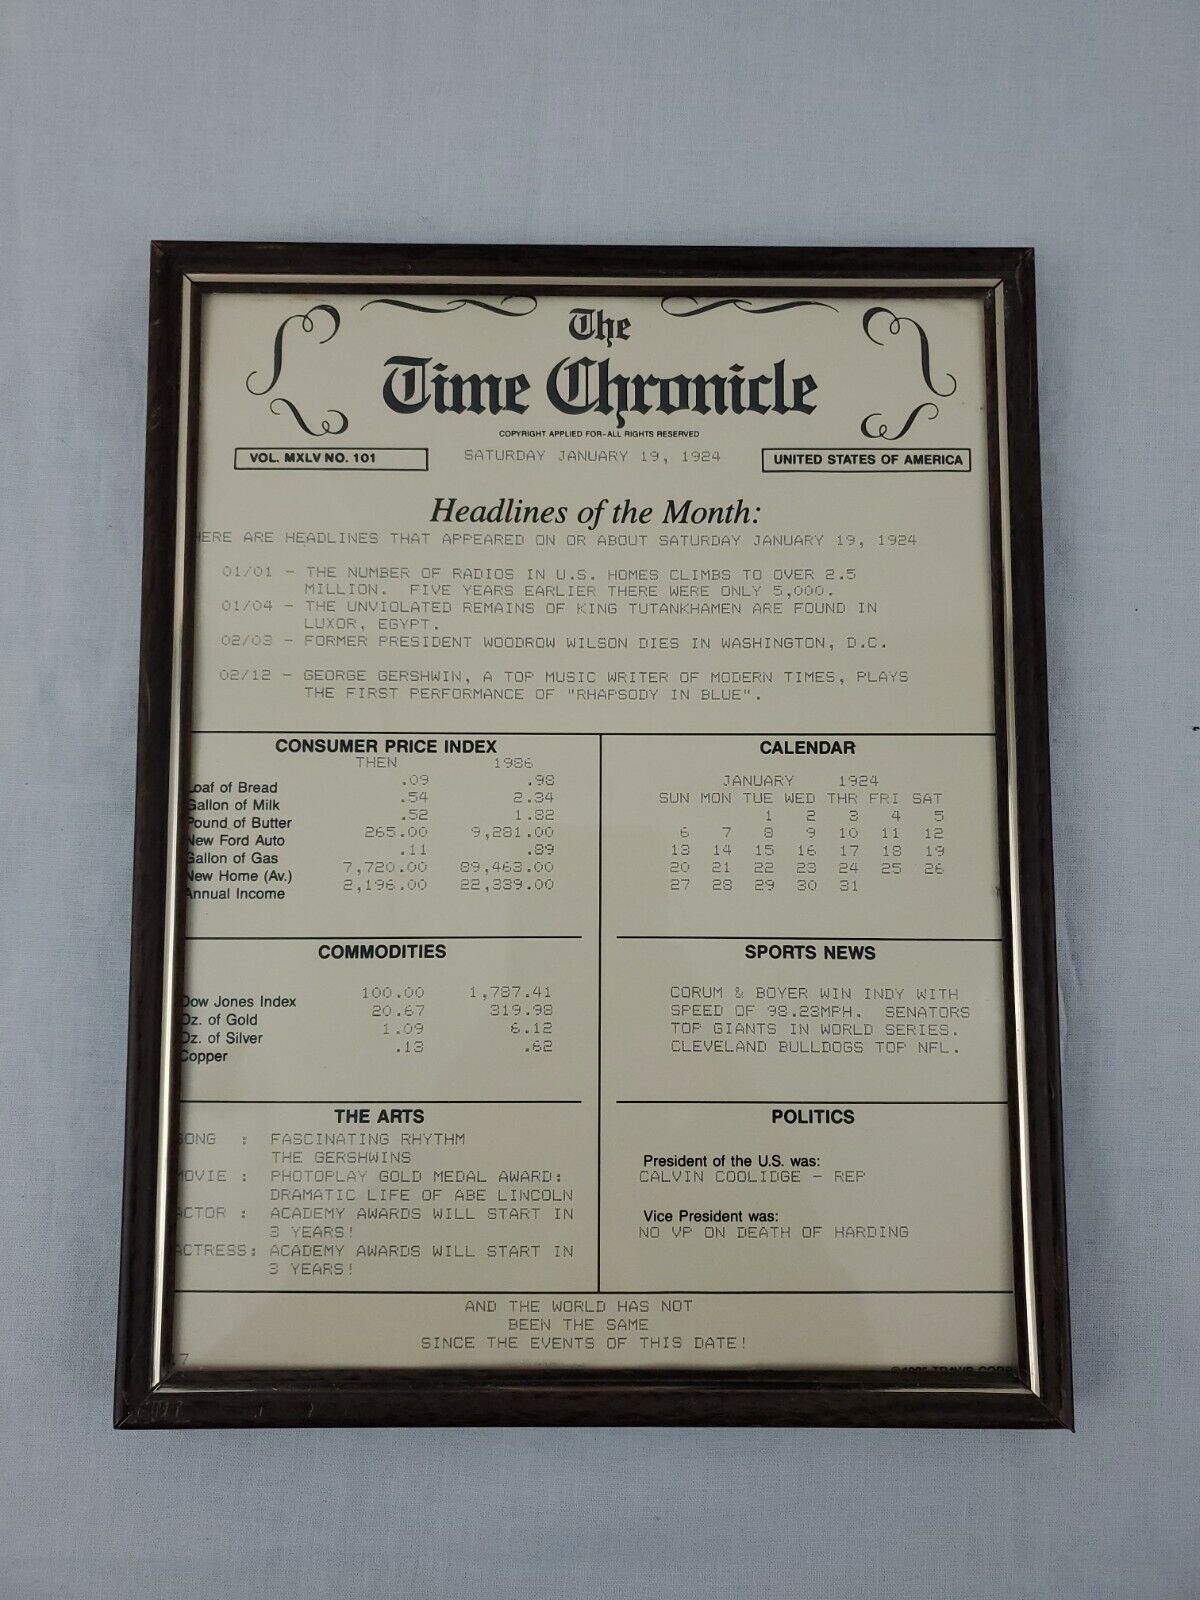 The Time Chronicle Vol MXLV NO. 101 USA Edition Jan 19, 1924 10”X11.5” Framed